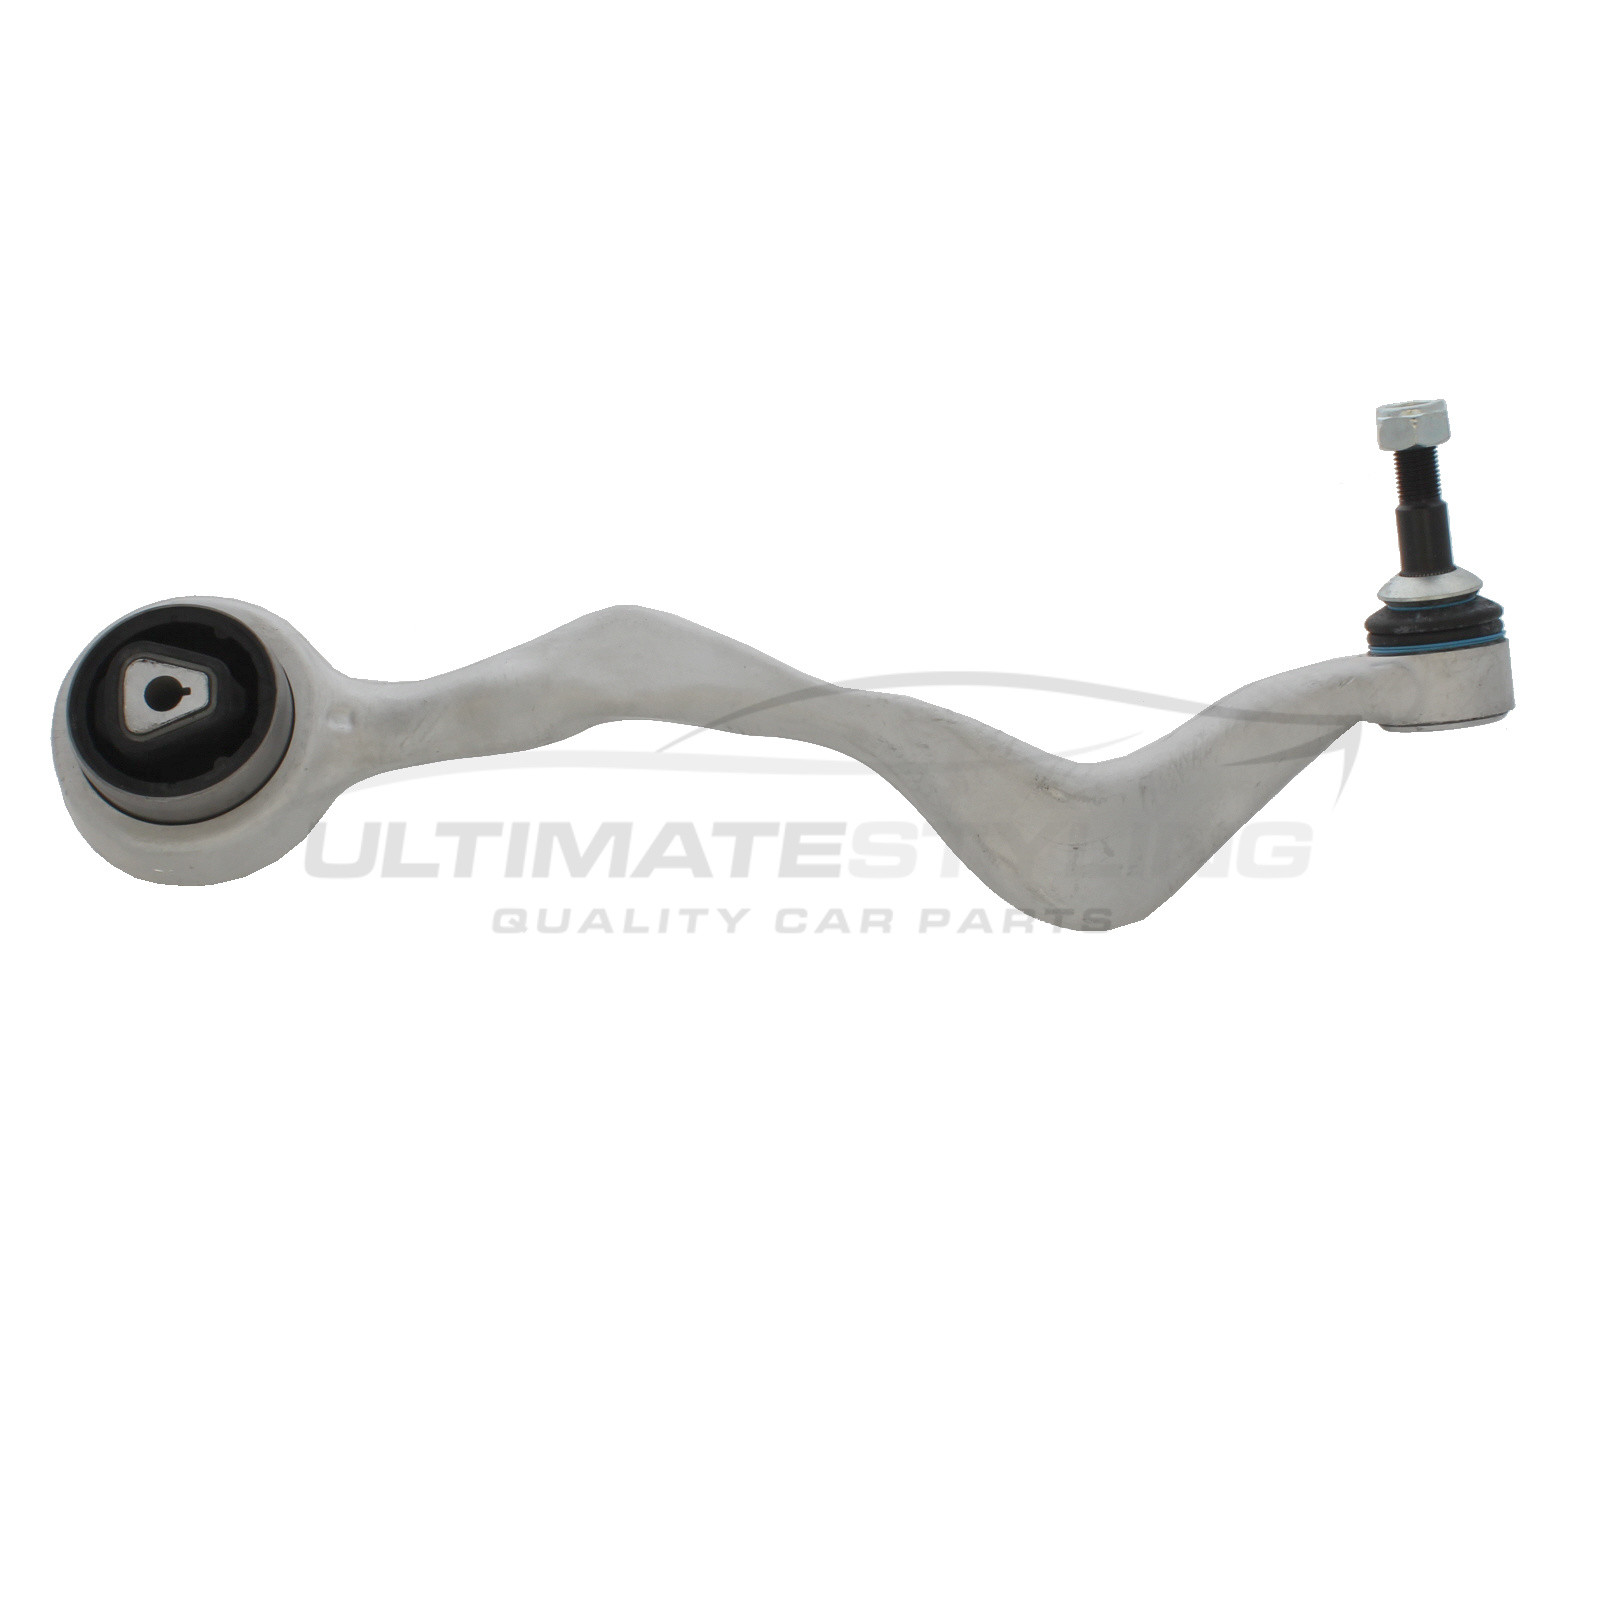 BMW 1 Series 2004-2014, BMW 3 Series 2005-2013, BMW X1 2009-2016, BMW Z4 2009-2017 Front Lower Suspension Arm (Alloy) Including Ball Joint and Rear Bush (Front of Wheel) Driver Side (RH)